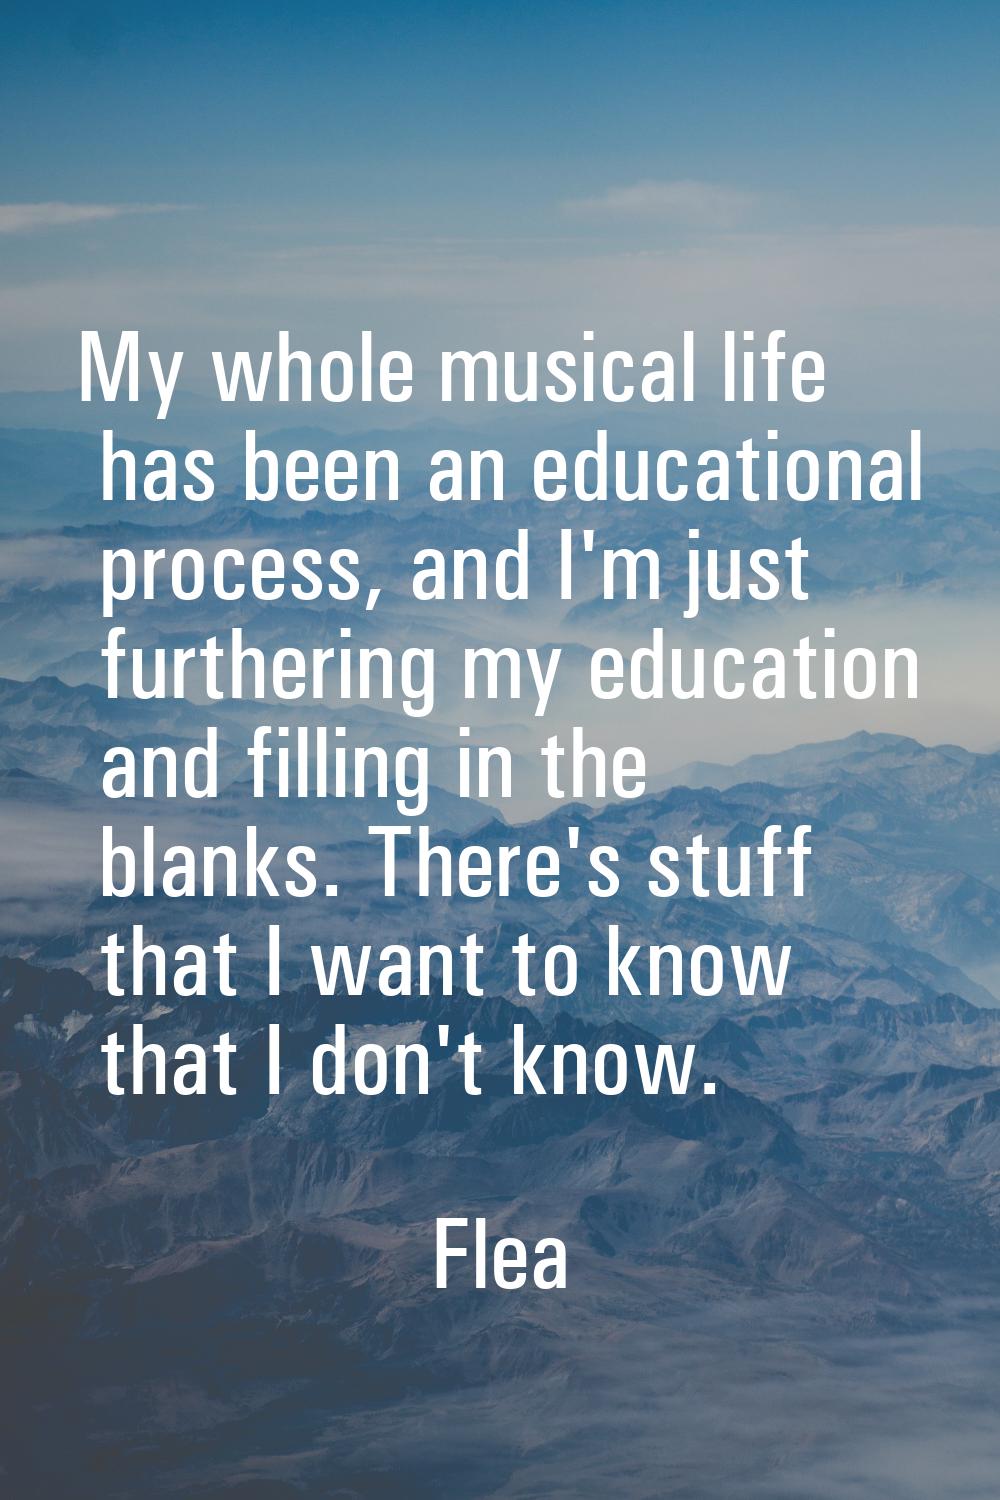 My whole musical life has been an educational process, and I'm just furthering my education and fil